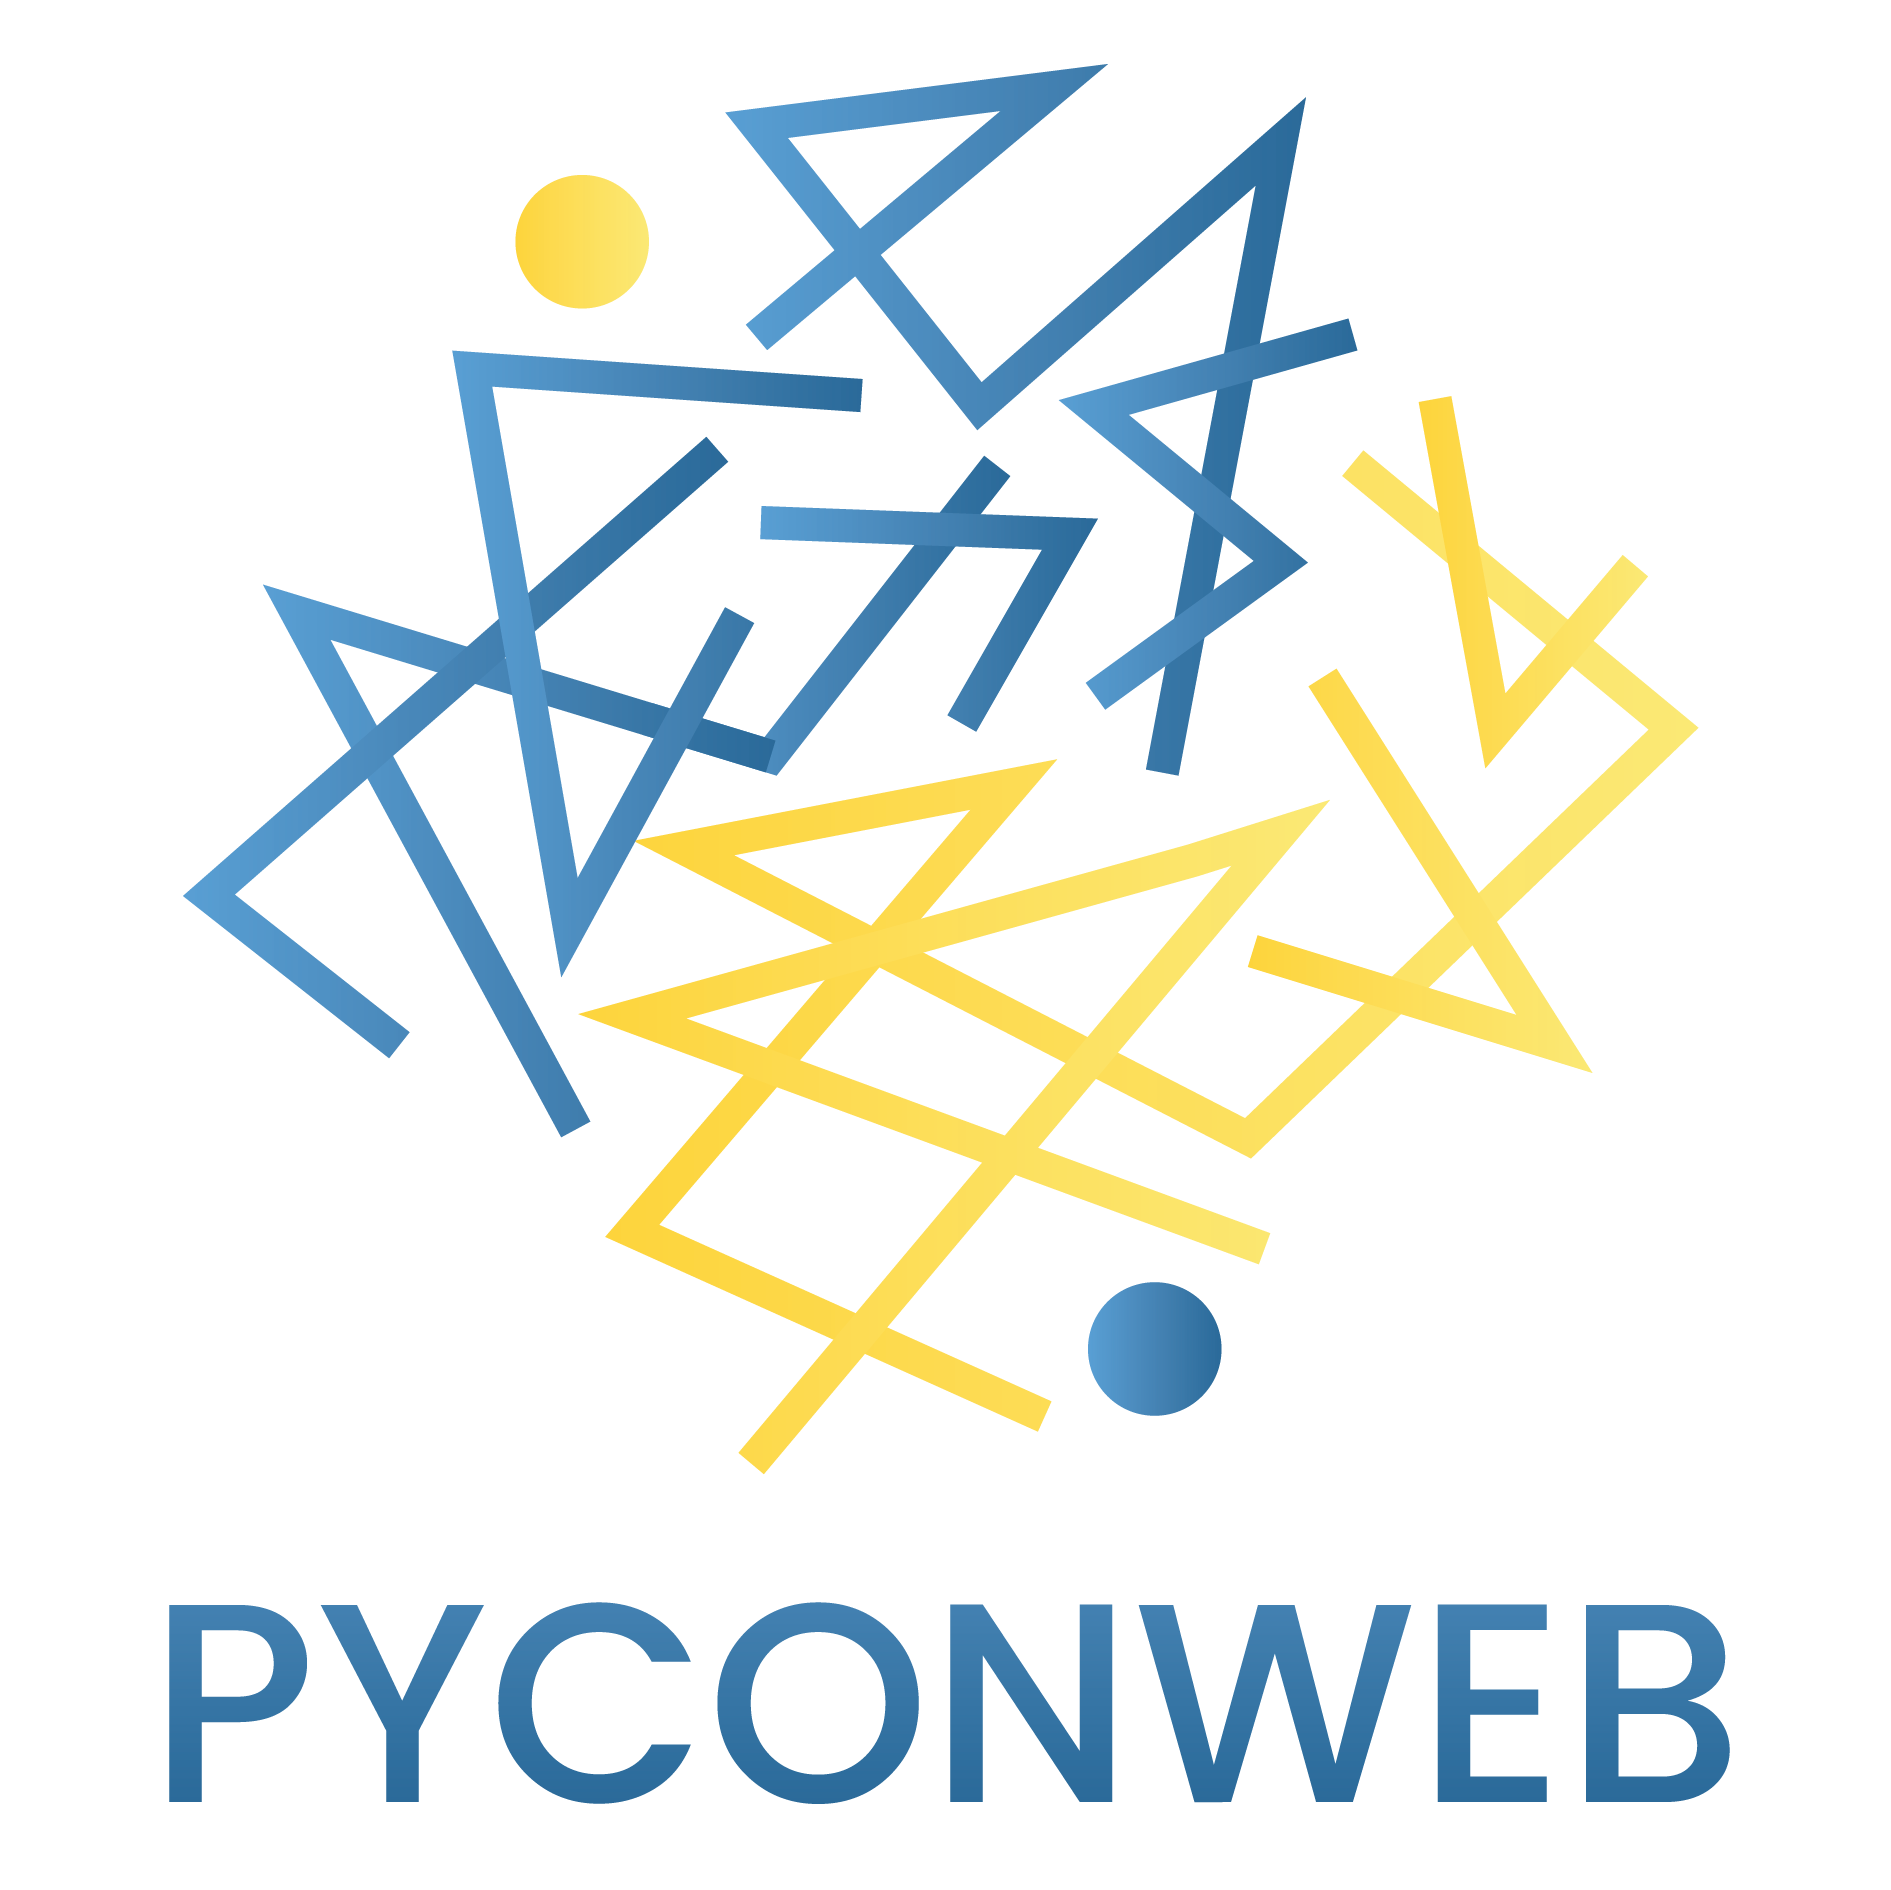 Logo of Plone Digital Experience Conference, 16-22 Oct 2017, Barcelona, Spain